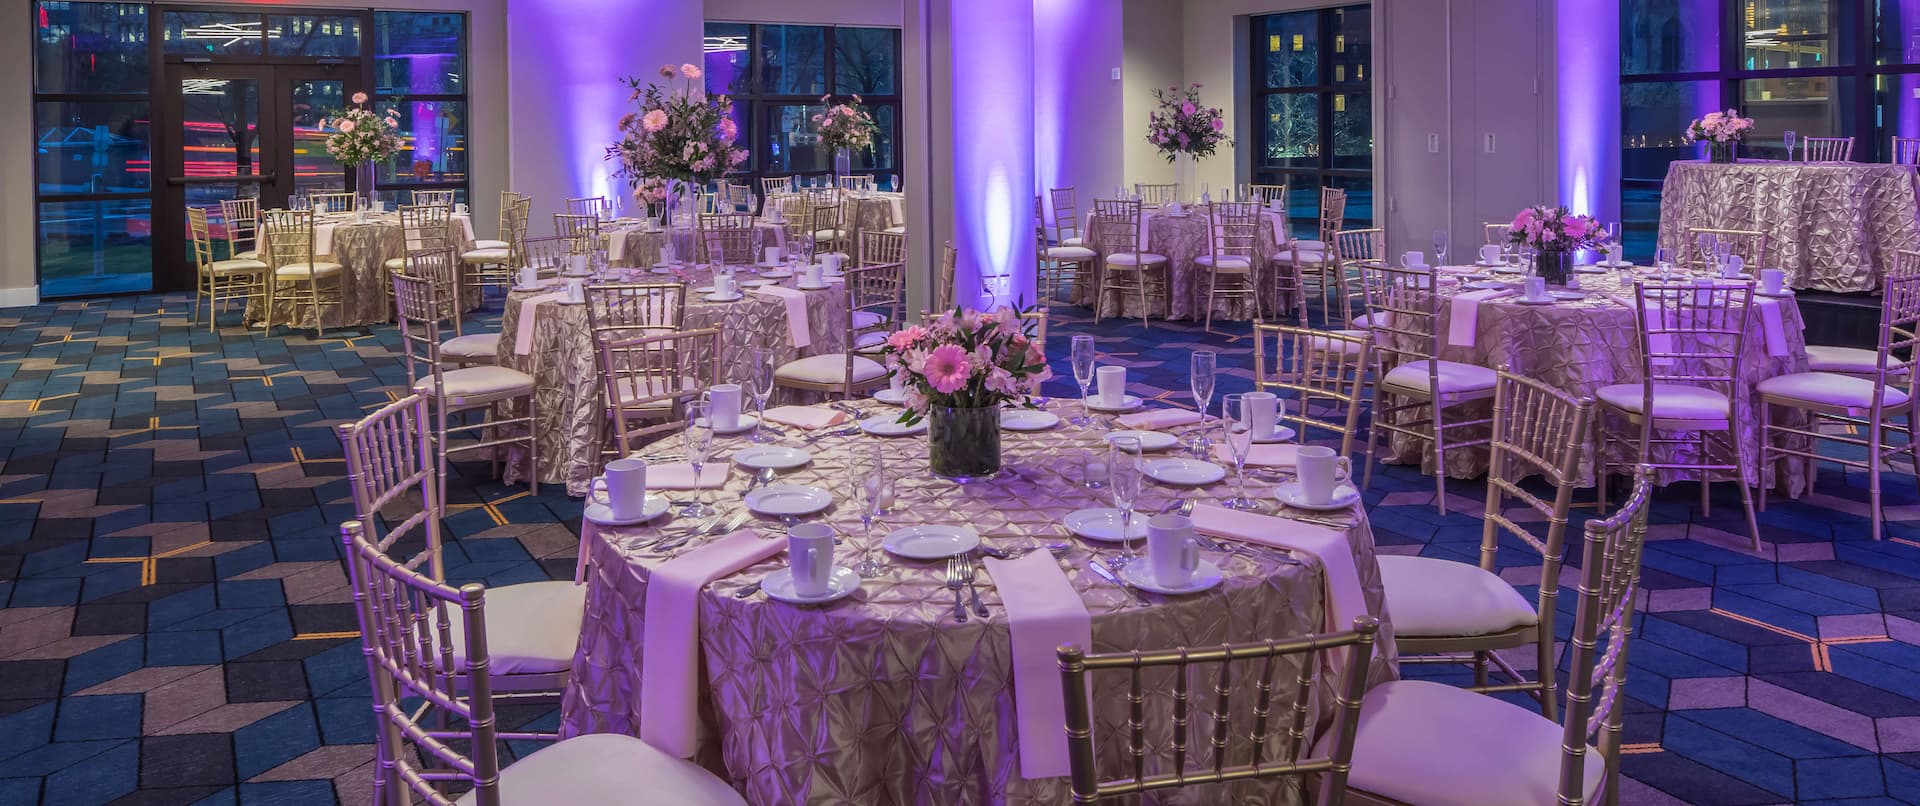 Ballroom With Purple Lighting, Place Settings, Flowers, Drinking Glasses, White Napkins, and Decorative Linens on Round Tables, Chairs, Windows and Glass Entry Doors